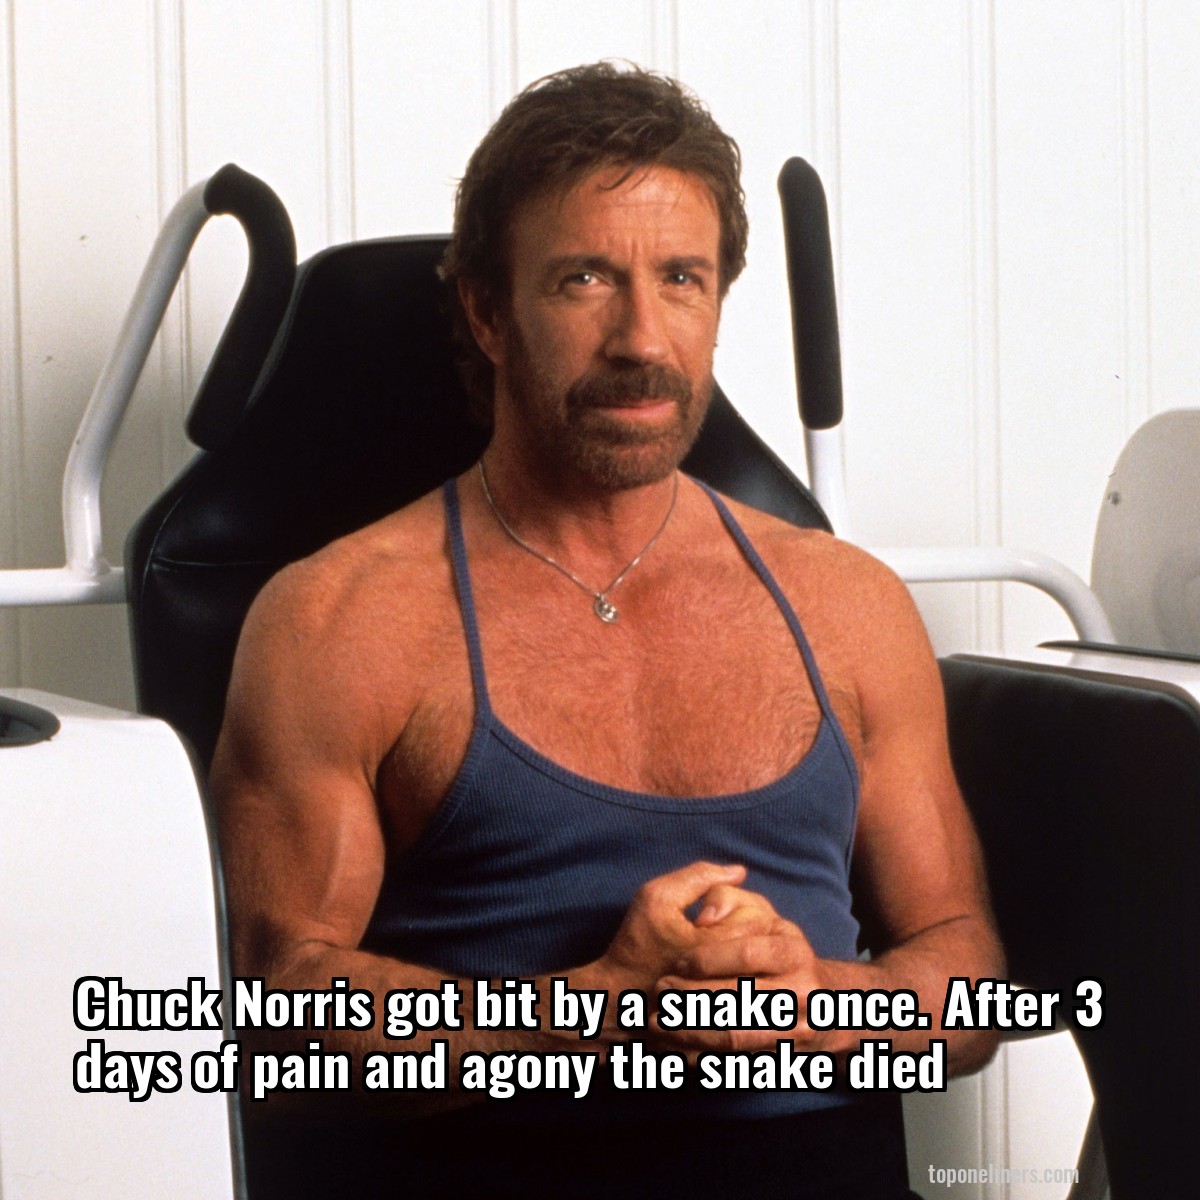 Chuck Norris got bit by a snake once. After 3 days of pain and agony the snake died